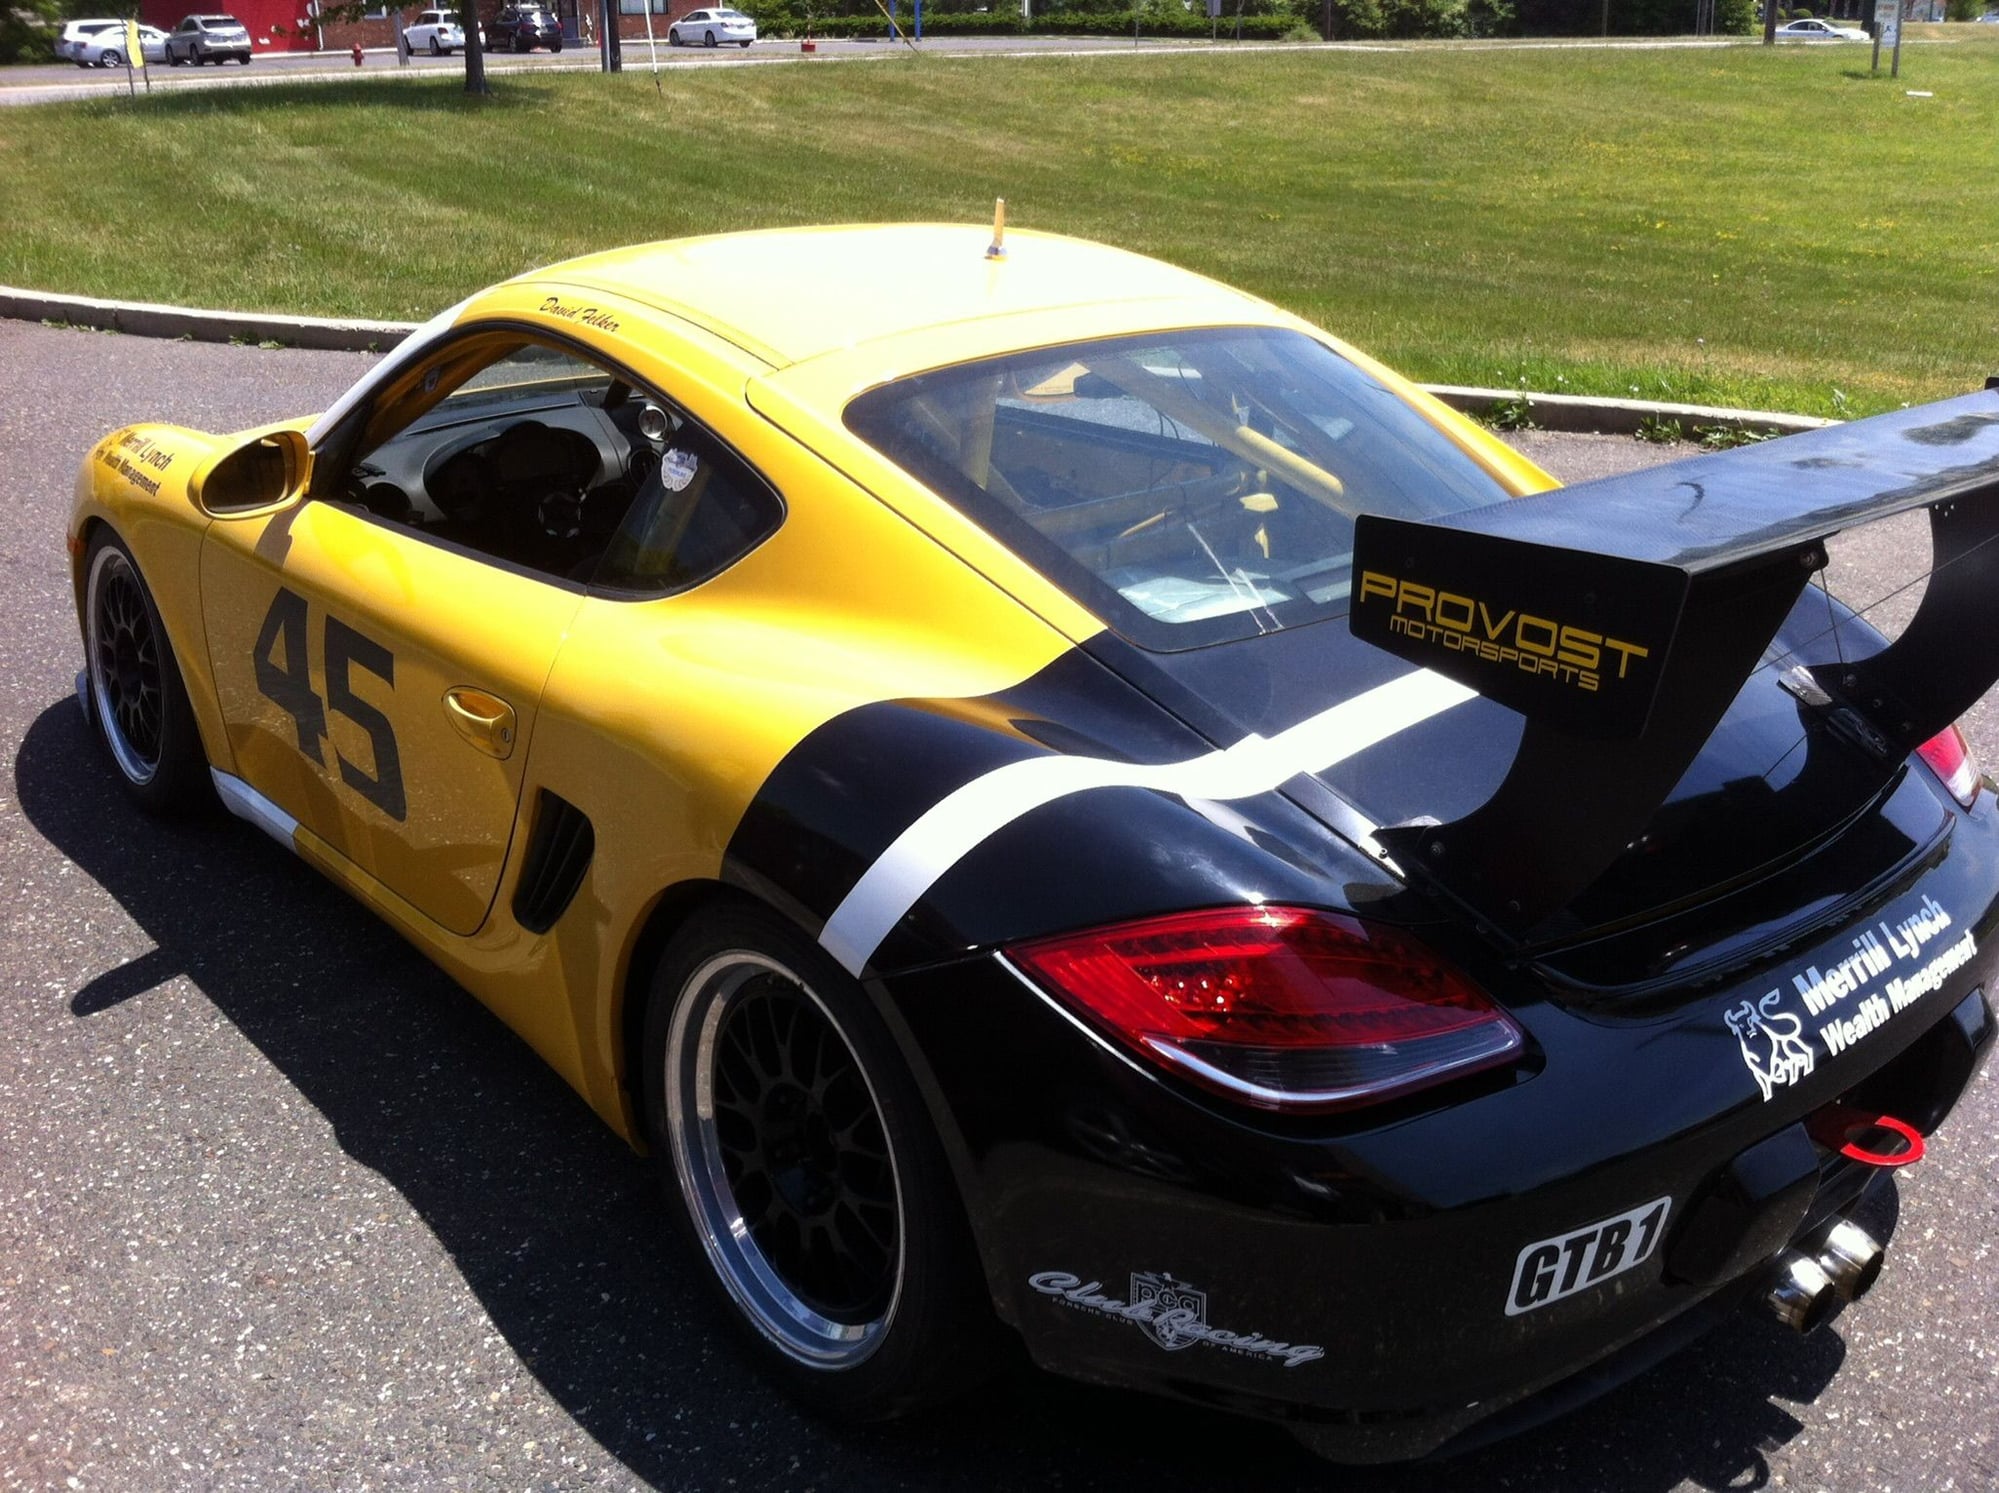 2009 Porsche Cayman - Cayman S Grand Am Conti Race Car For SALE - Used - VIN WP0AB29899U780489 - 9,875 Miles - 6 cyl - 2WD - Manual - Coupe - Yellow - Newtown, PA 18940, United States